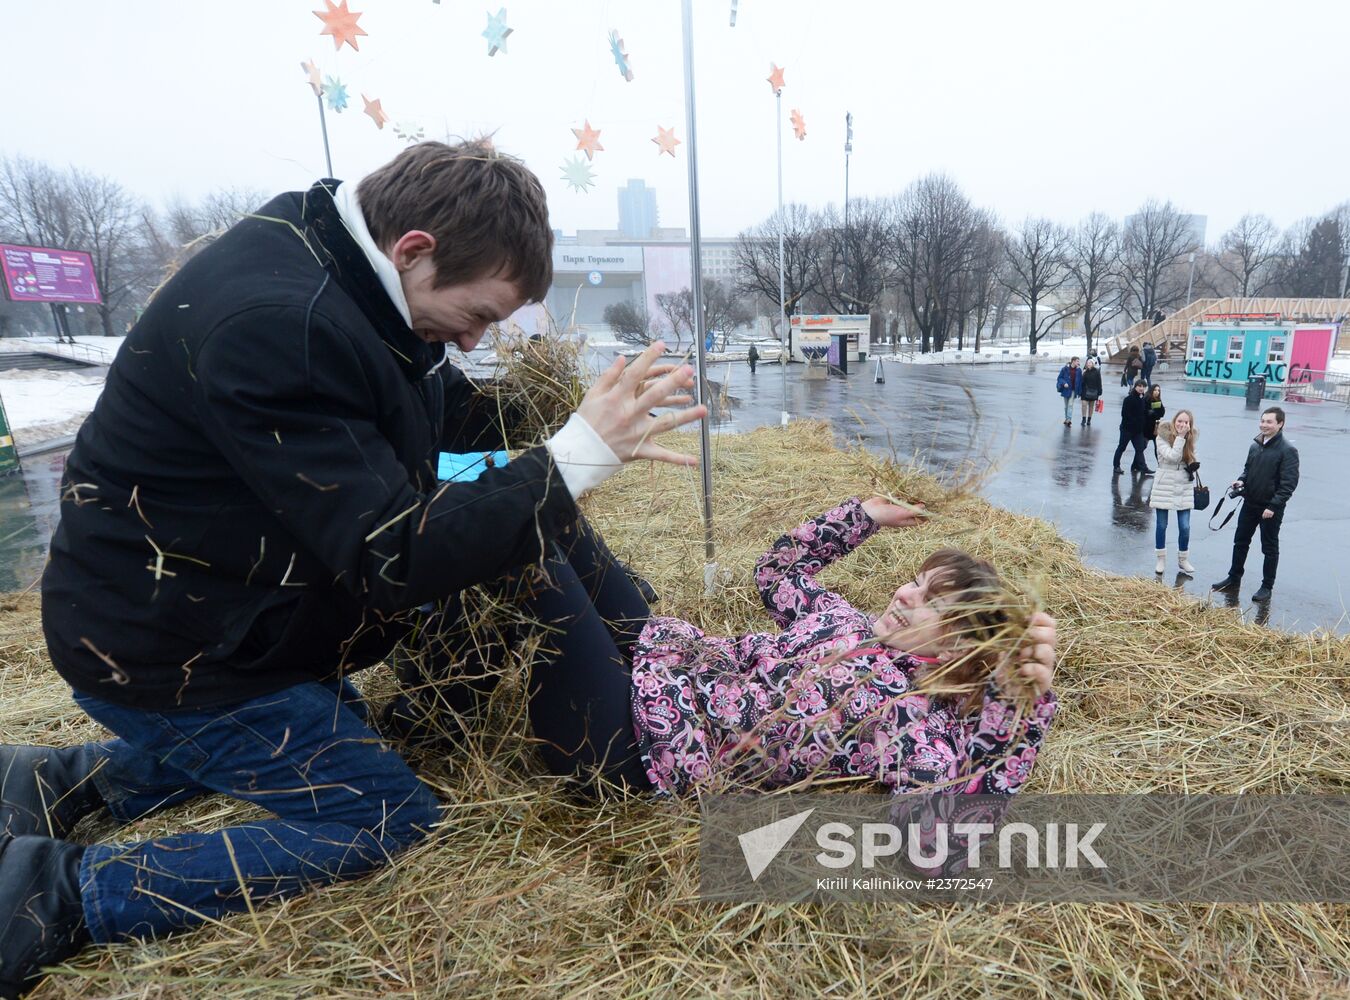 Ten-feet high hayloft for lovers appeared in Gorky Park for St Valentine's Day